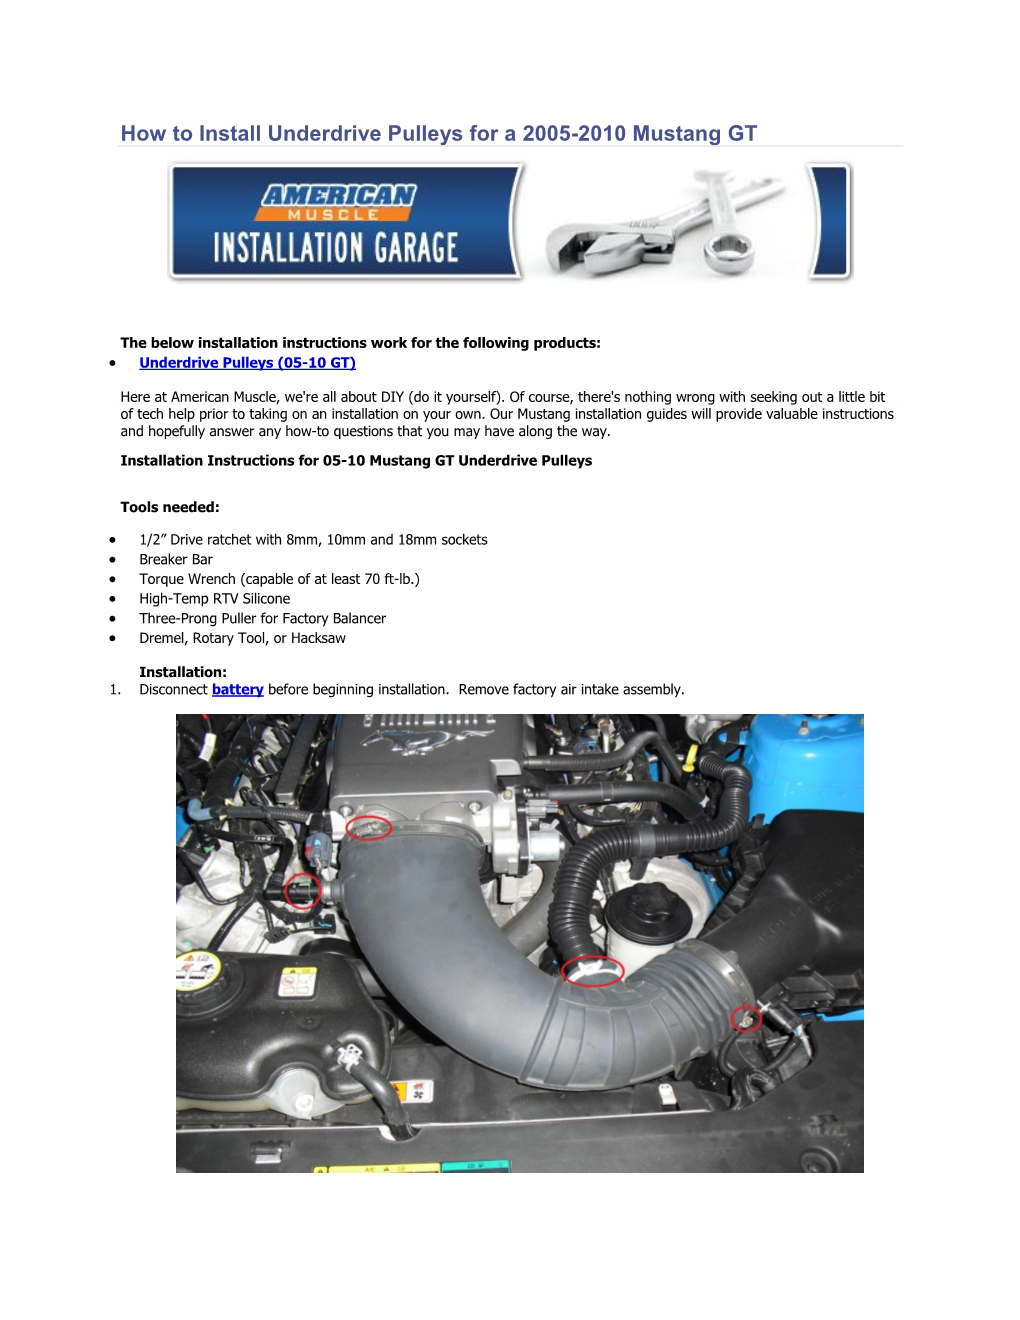 How to Install Underdrive Pulleys for a 2005-2010 Mustang GT